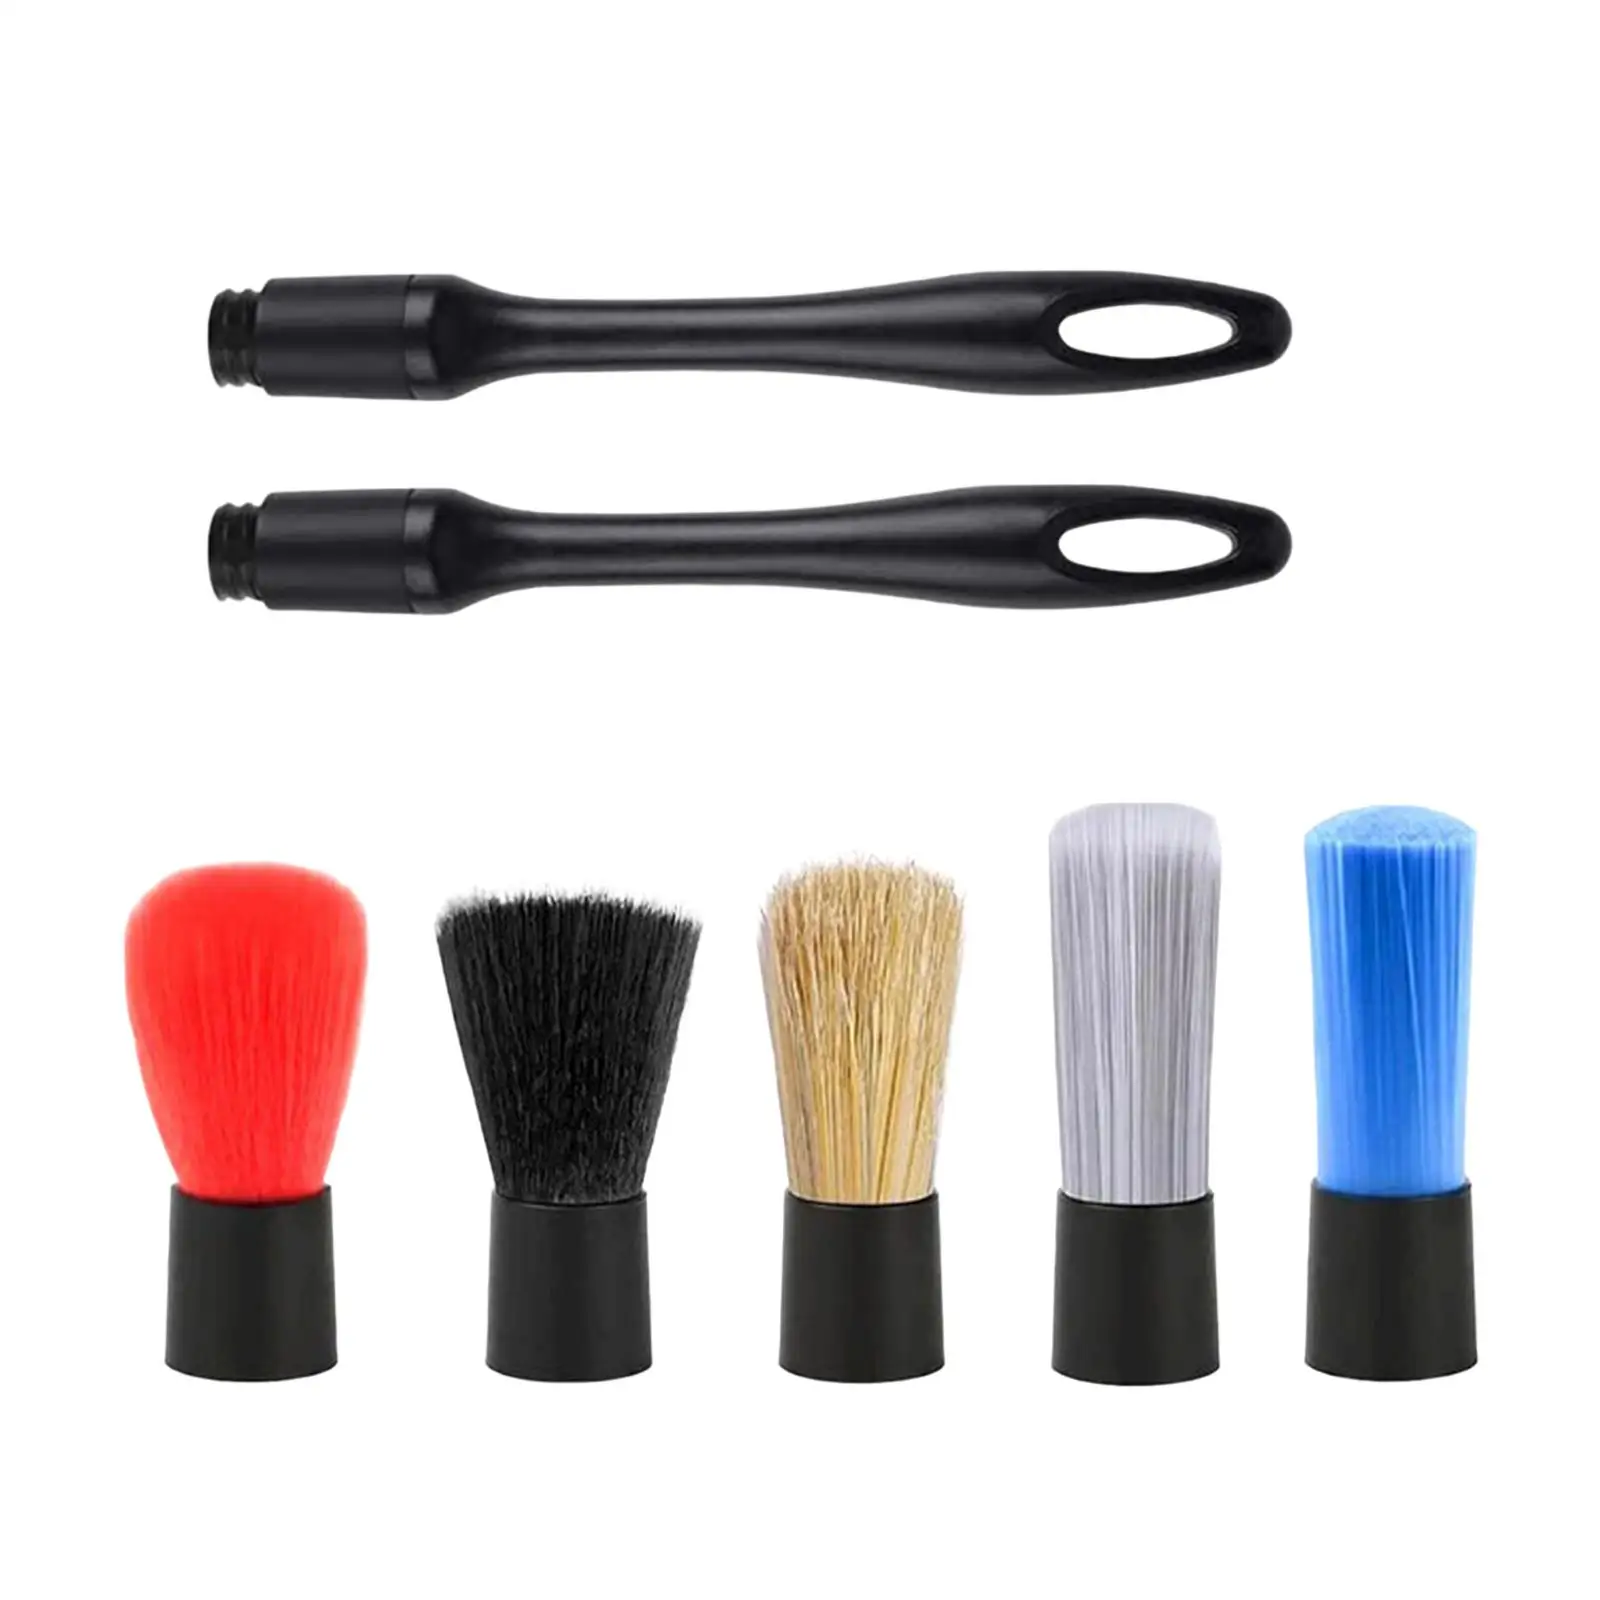 Auto Detailing Brush Set Cleaning Tools Durable Wet and Dry Use for Cleaning Interior Exterior Washing Air Vents Dashboard